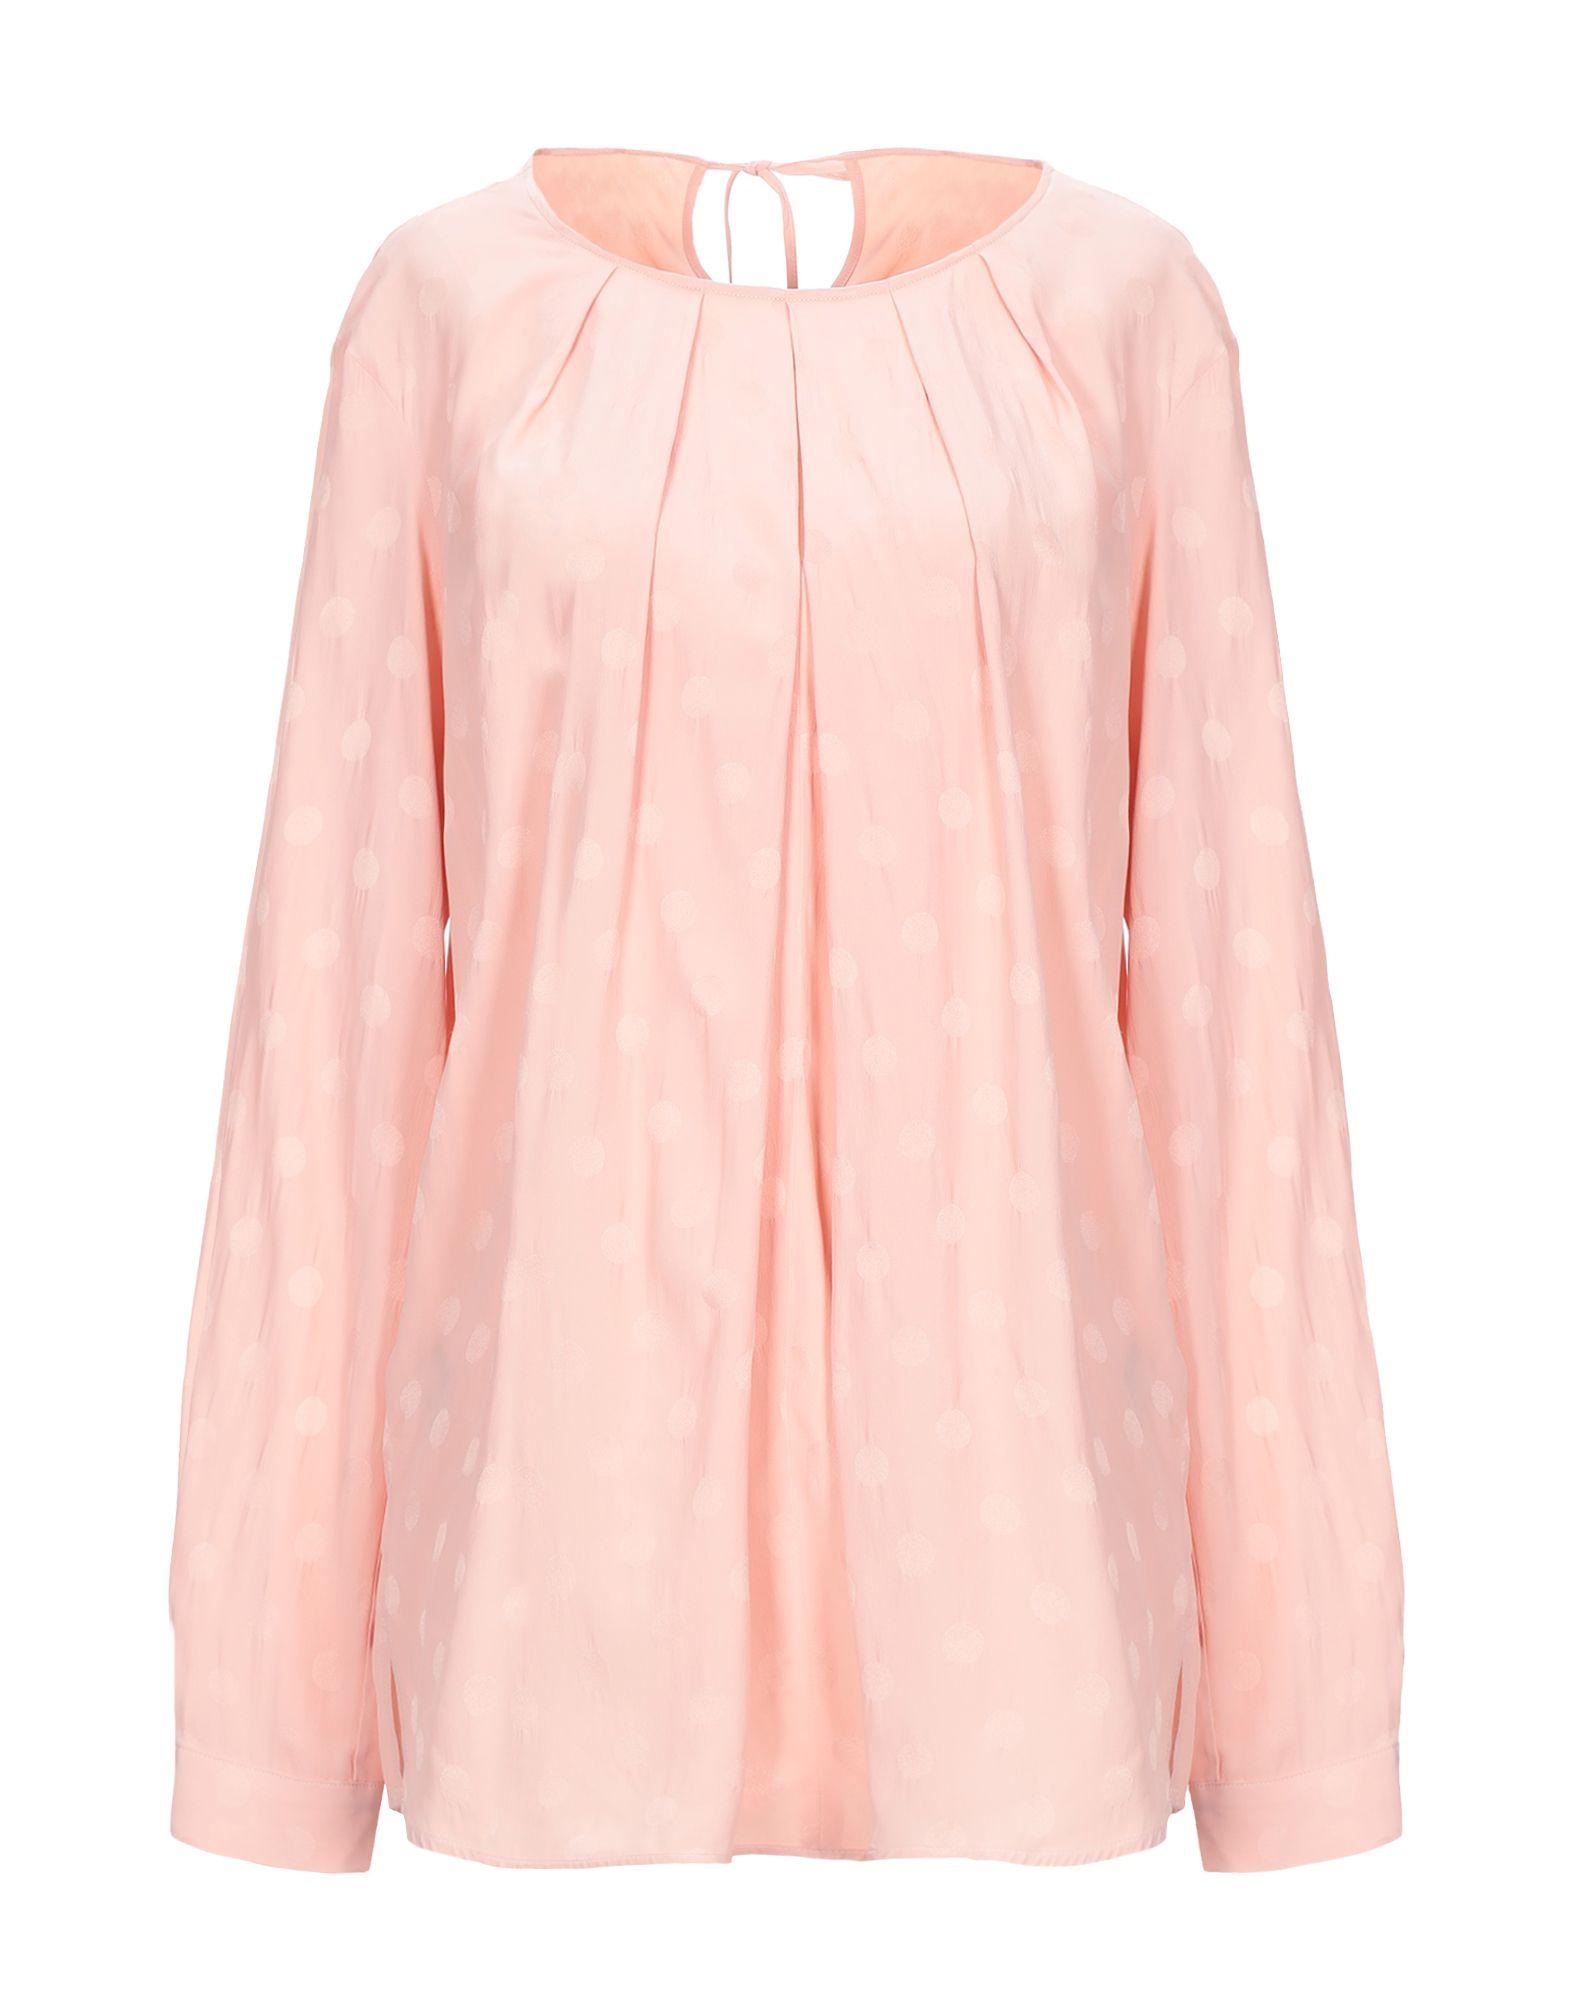 Dondup Silk Blouse in Pink - Lyst